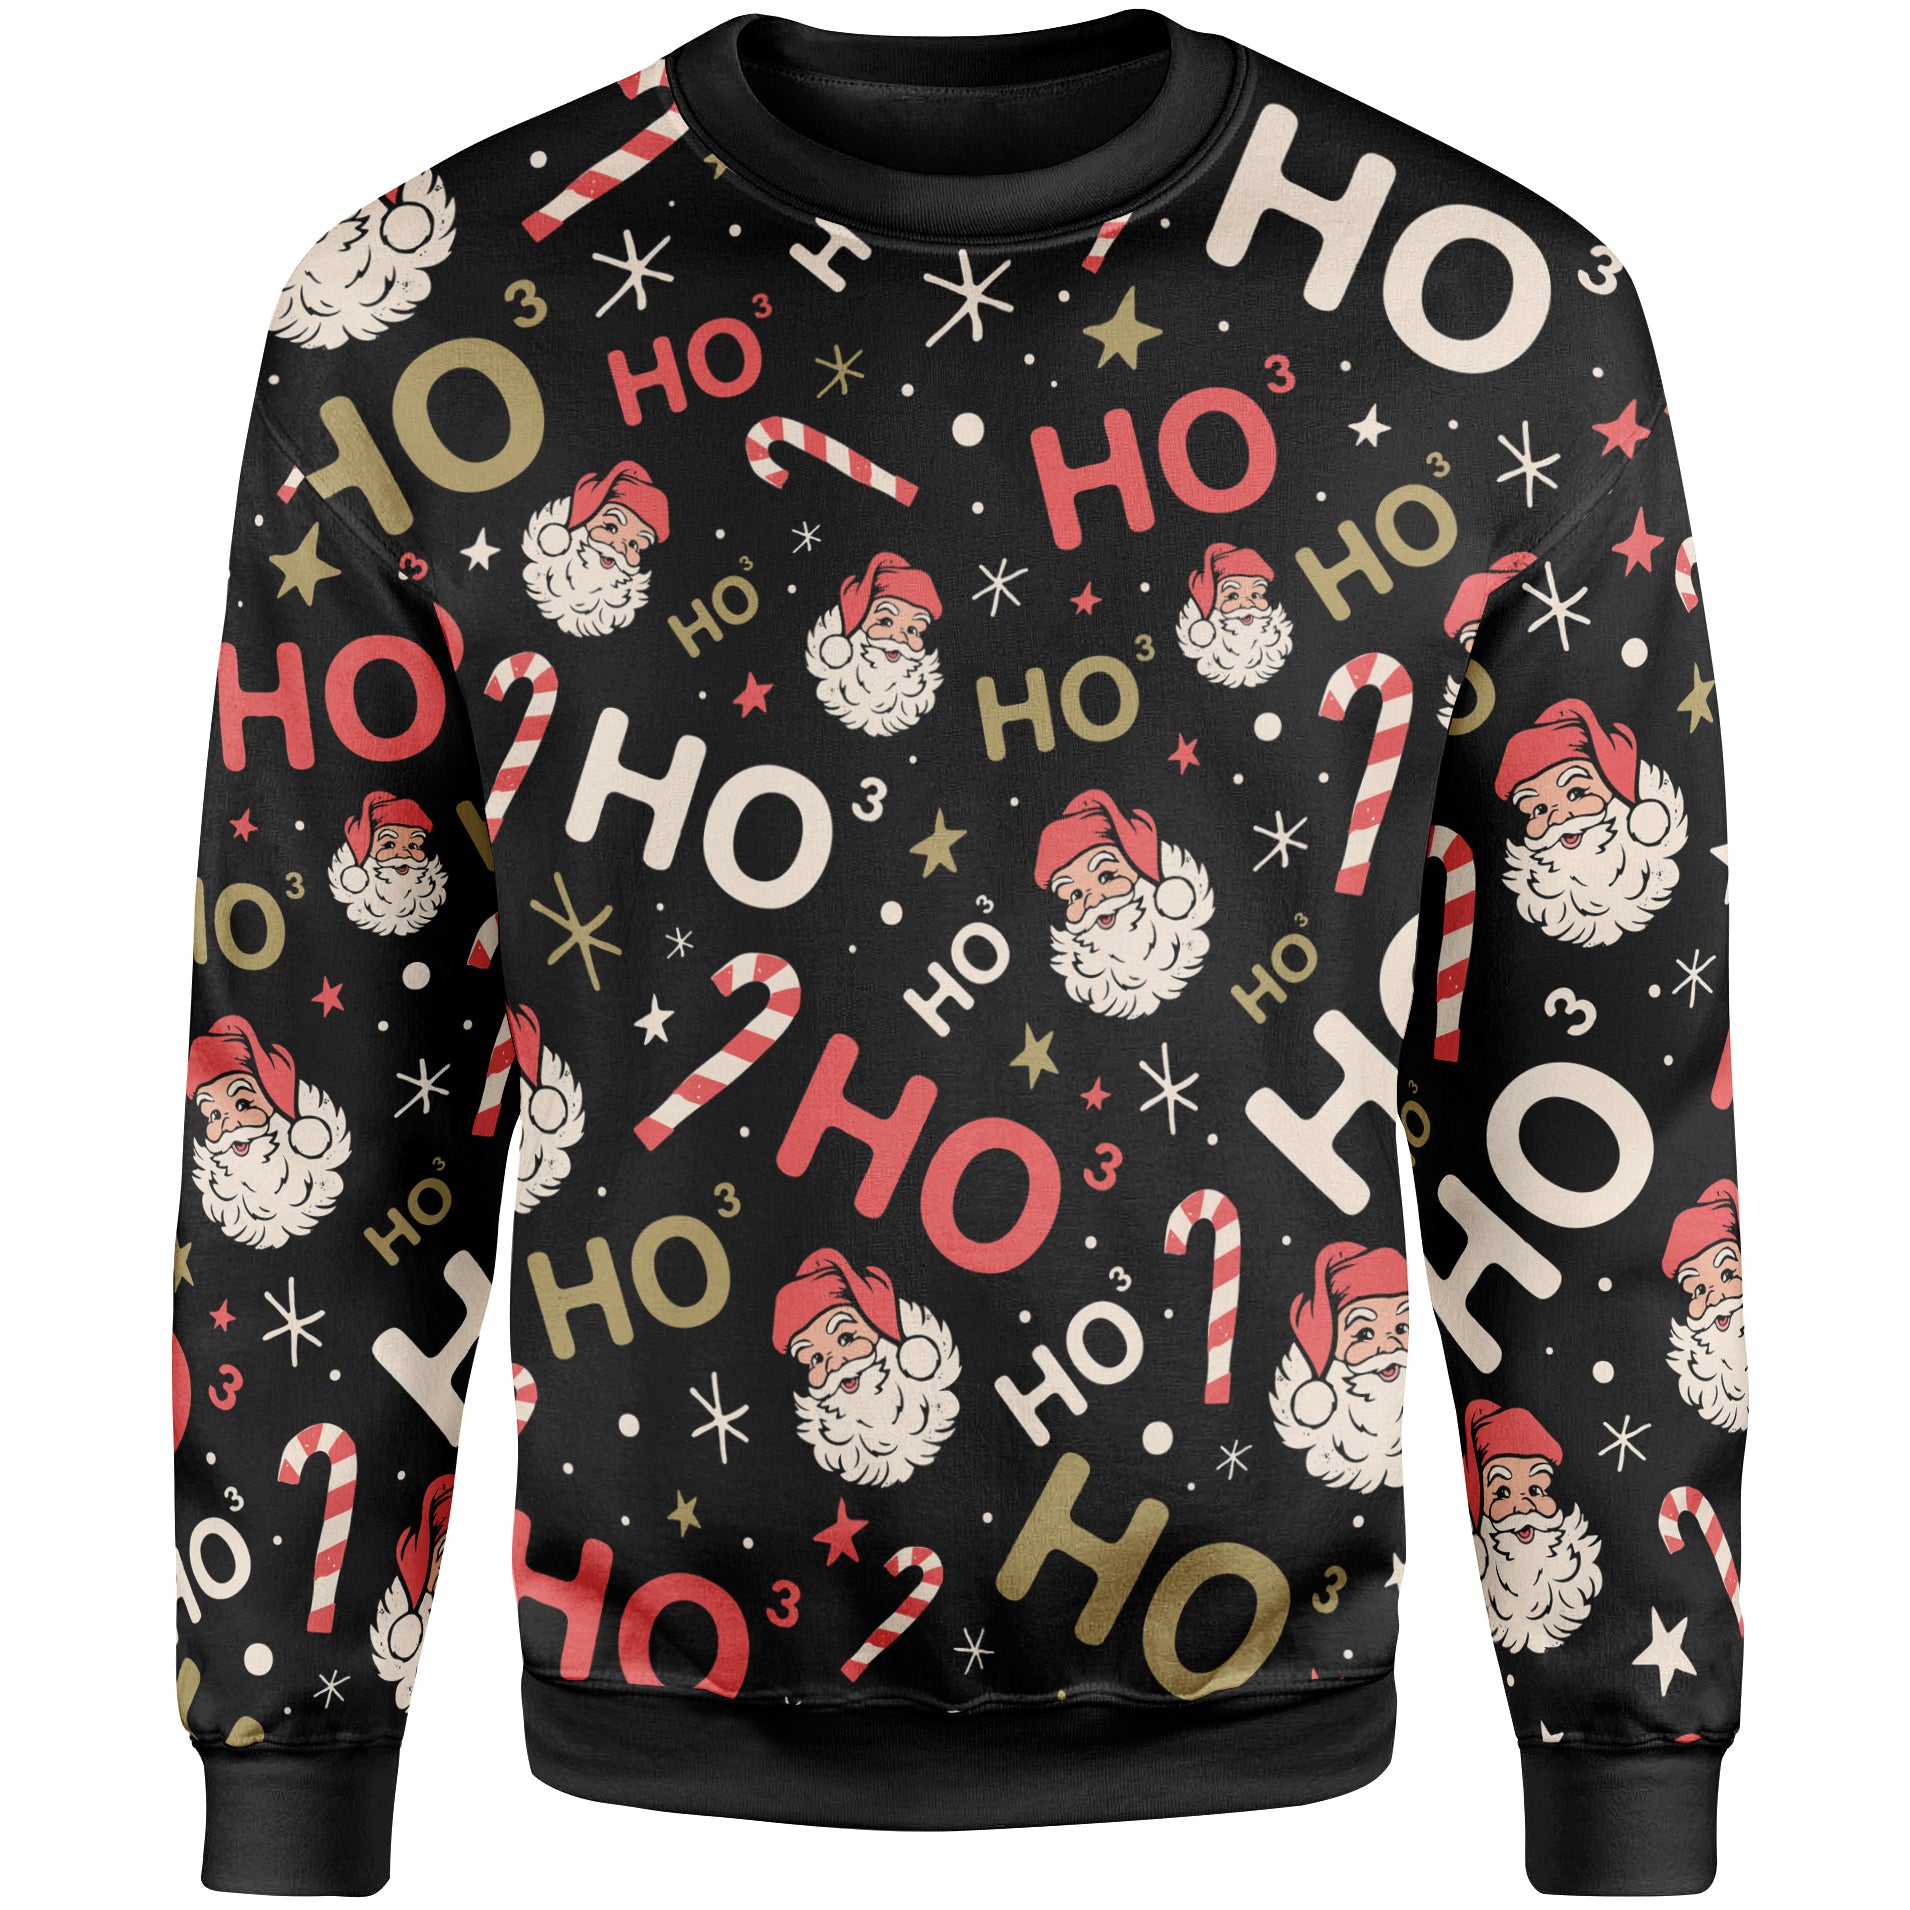 Ho to the Third - All Over Sweatshirt